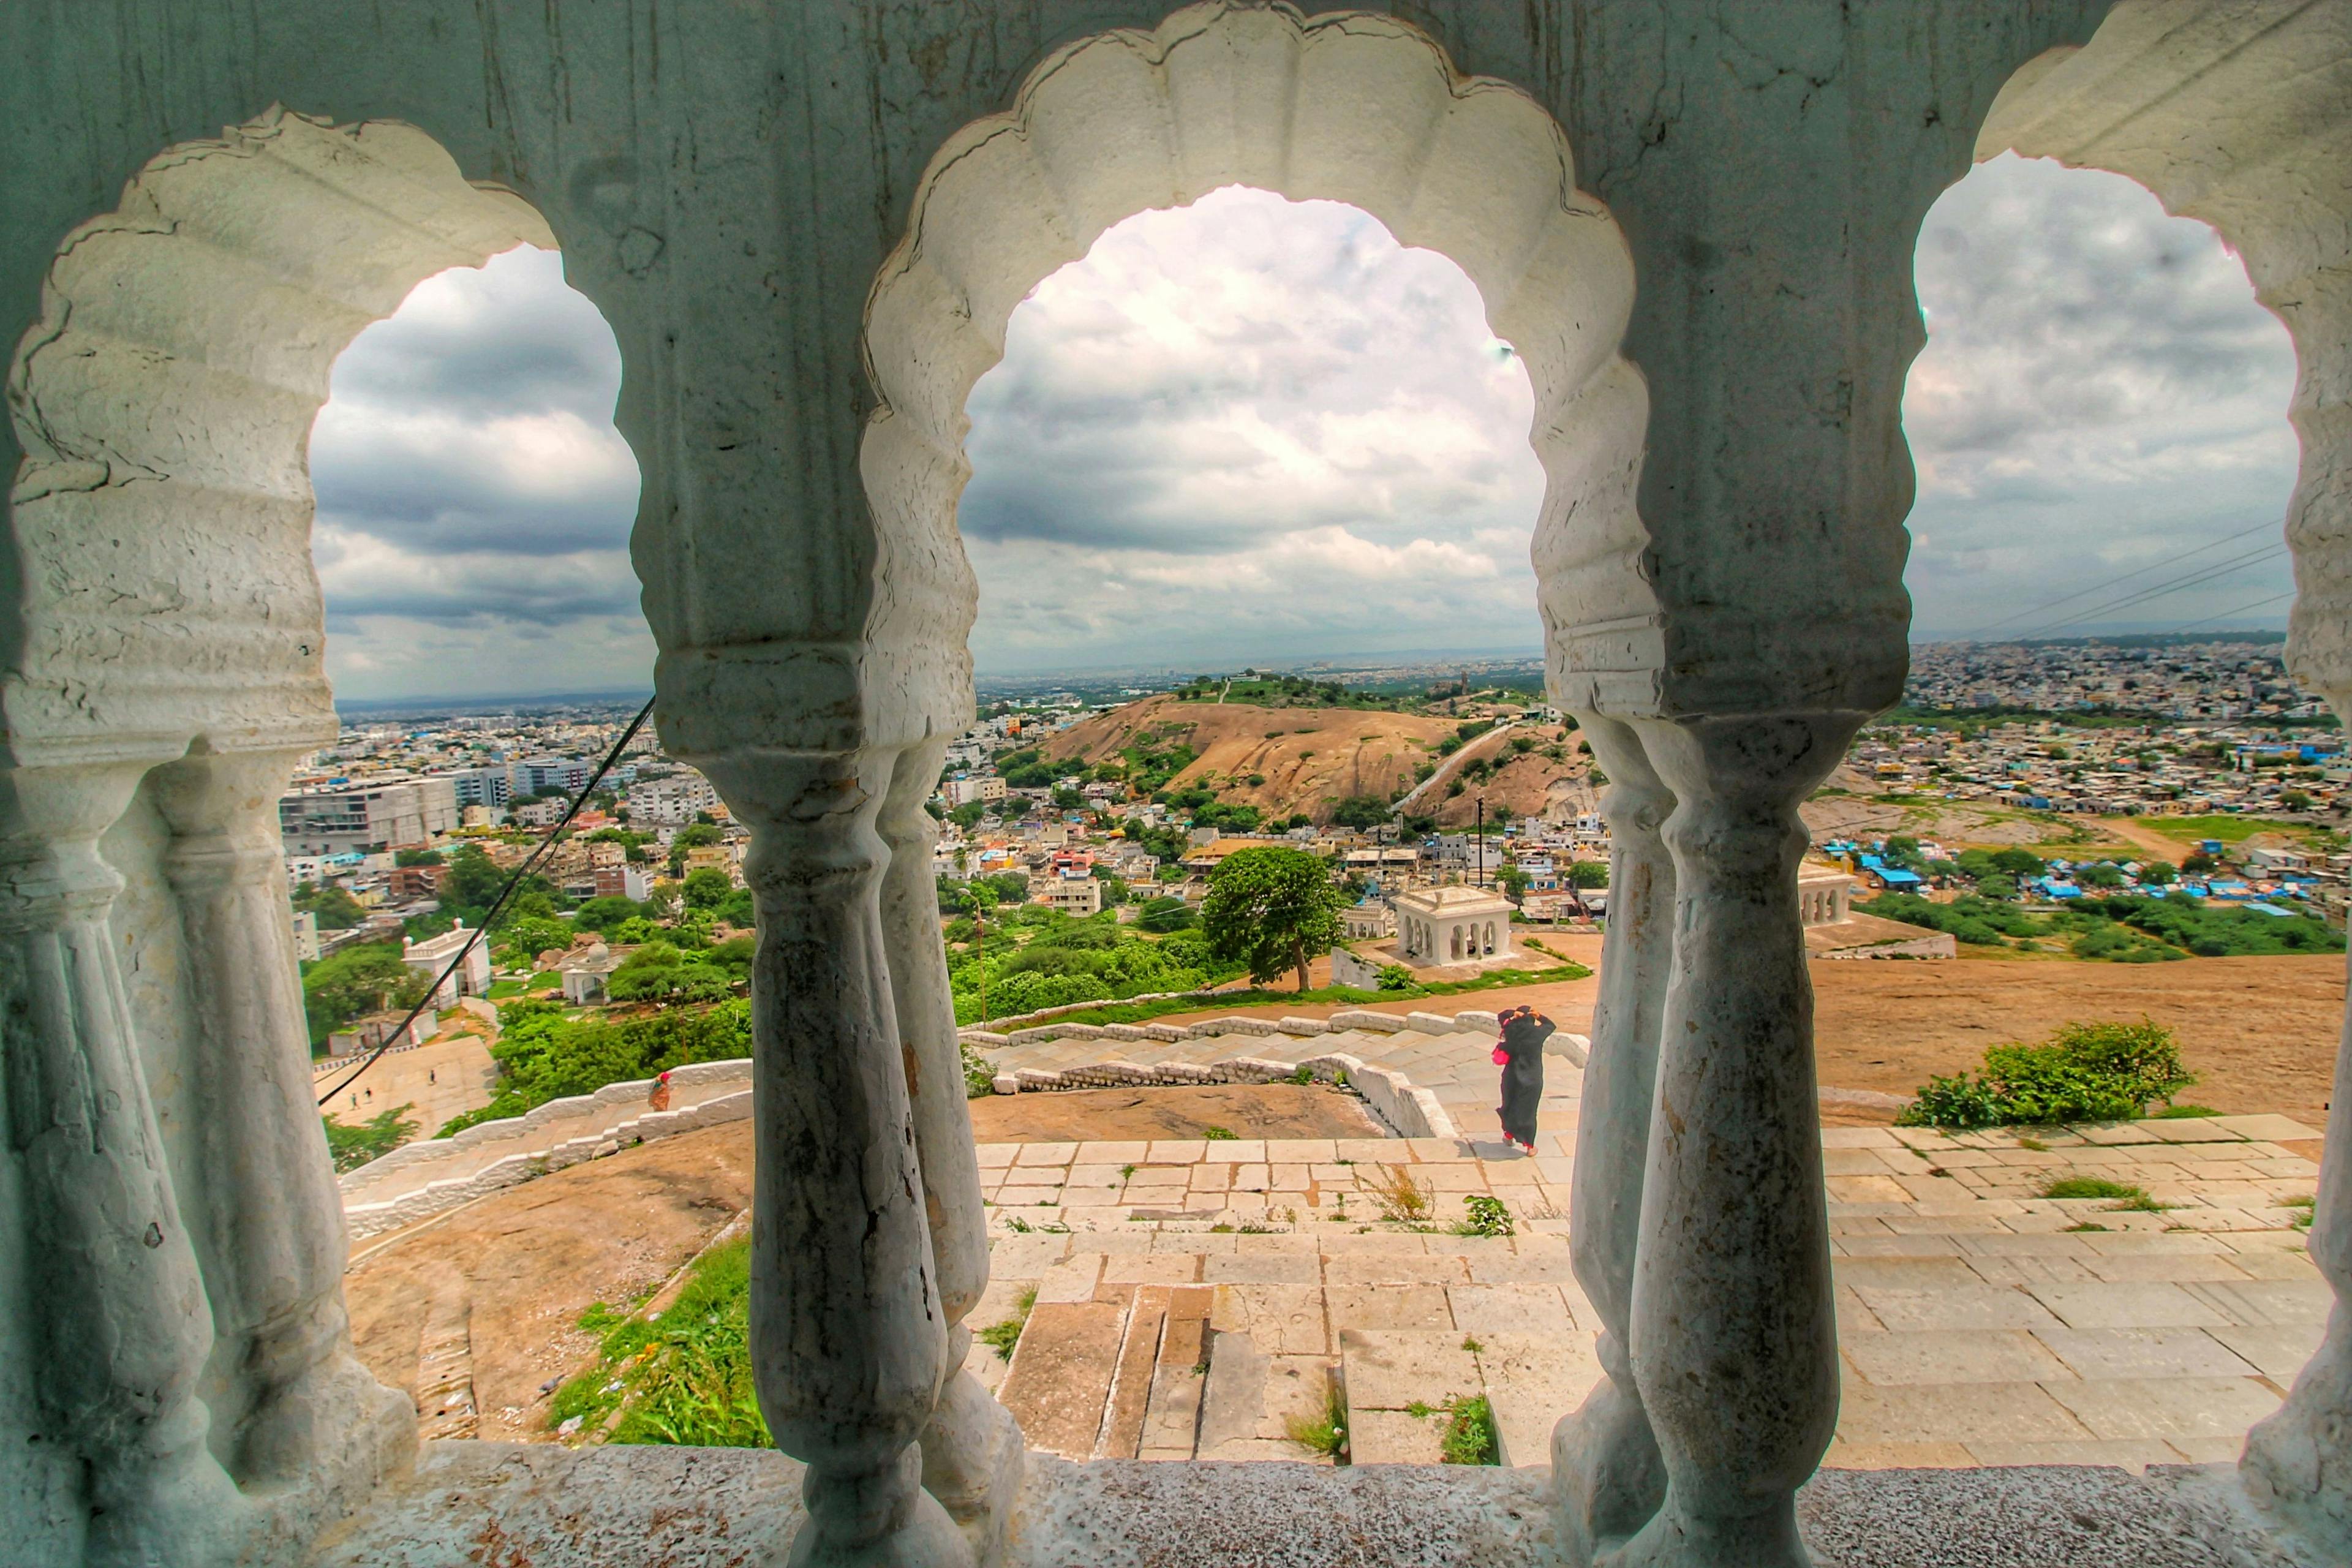 Standing behind arches on the dome-shaped hillock, from Moula Ali hill one can get stunning views of Hyderabad and its twin city, Secunderabad